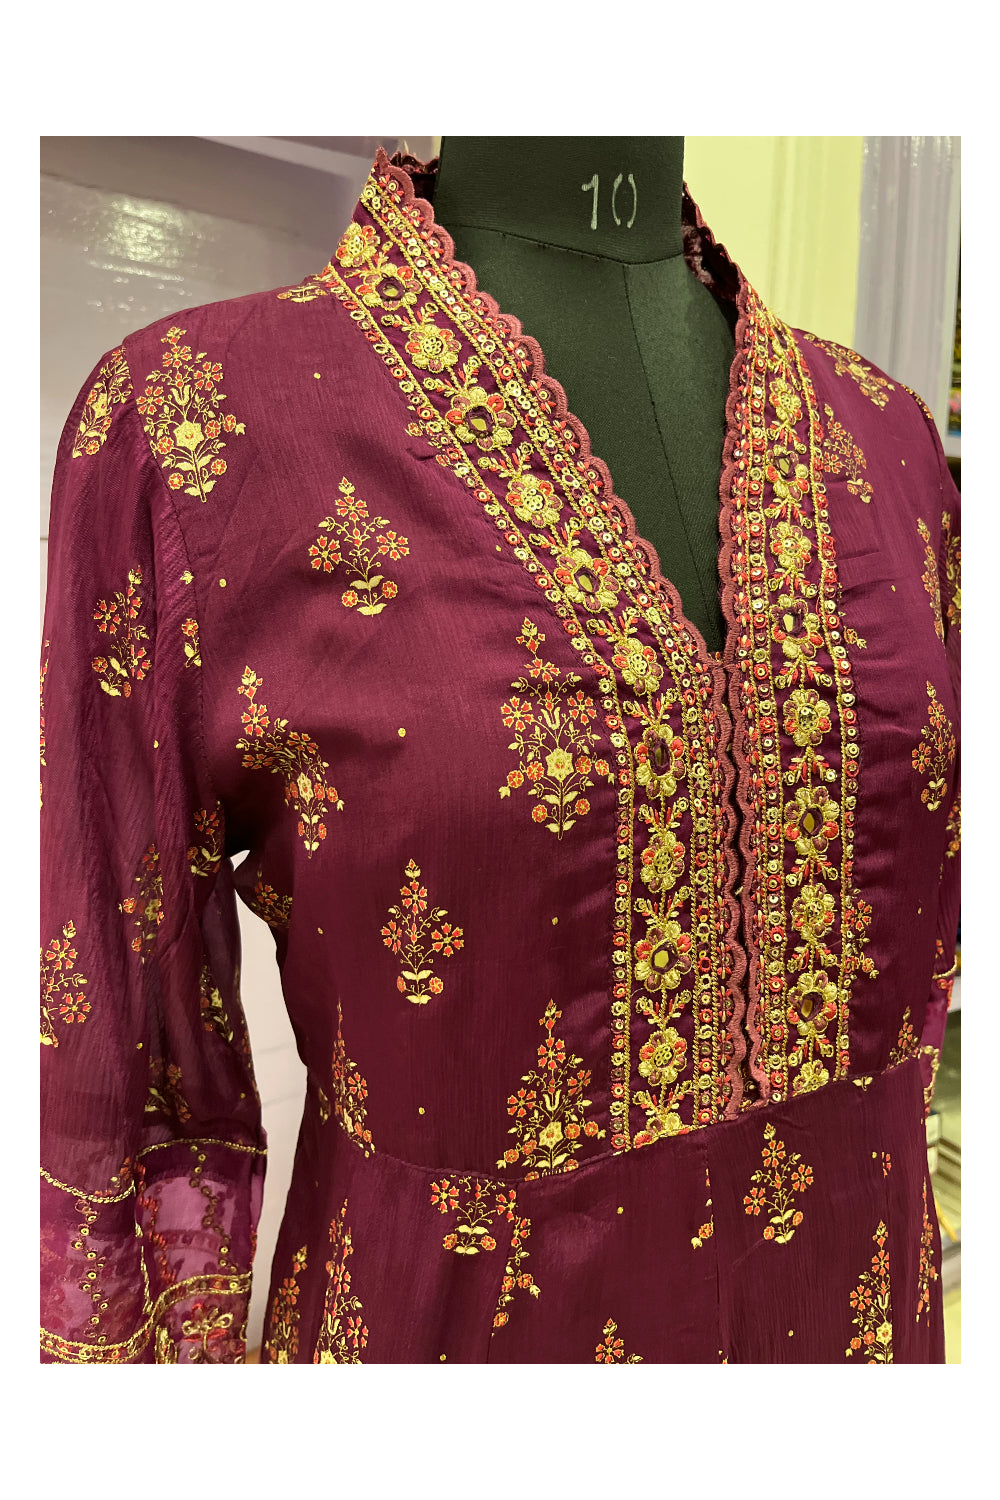 Southloom Stitched Semi Silk Purple Salwar Set with Sequins Works in Yoke